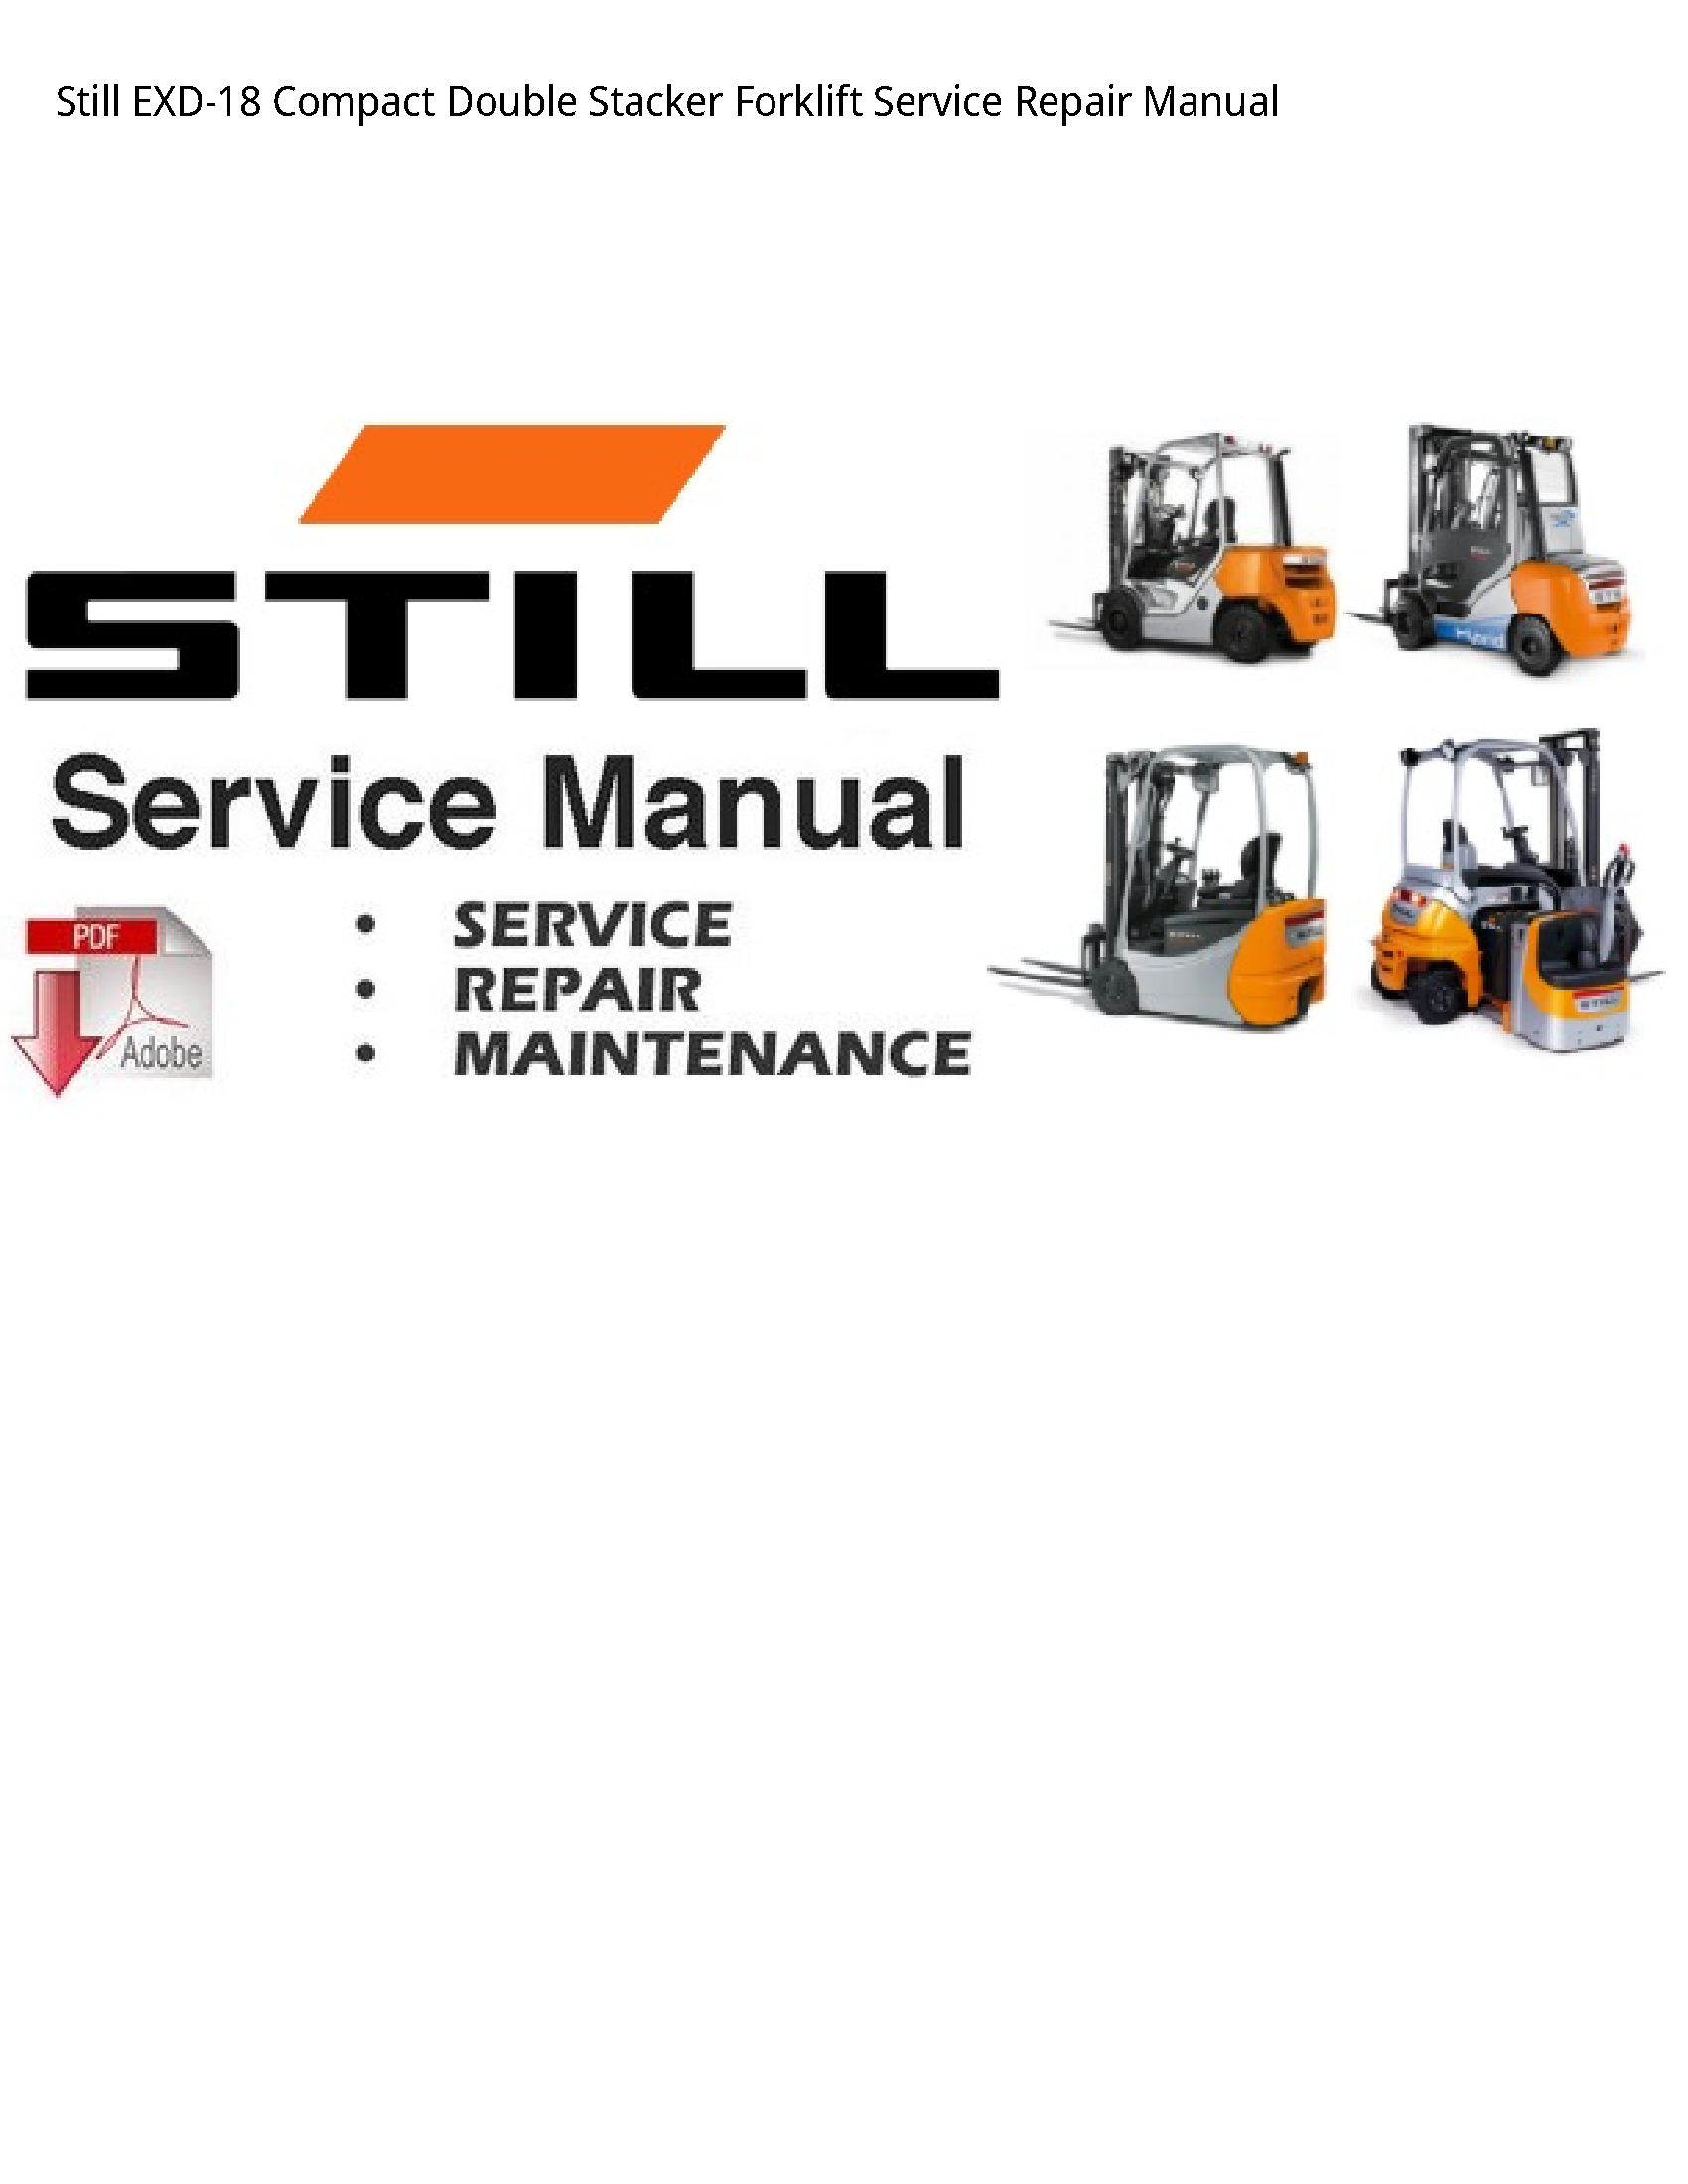 Still EXD-18 Compact Double Stacker Forklift manual